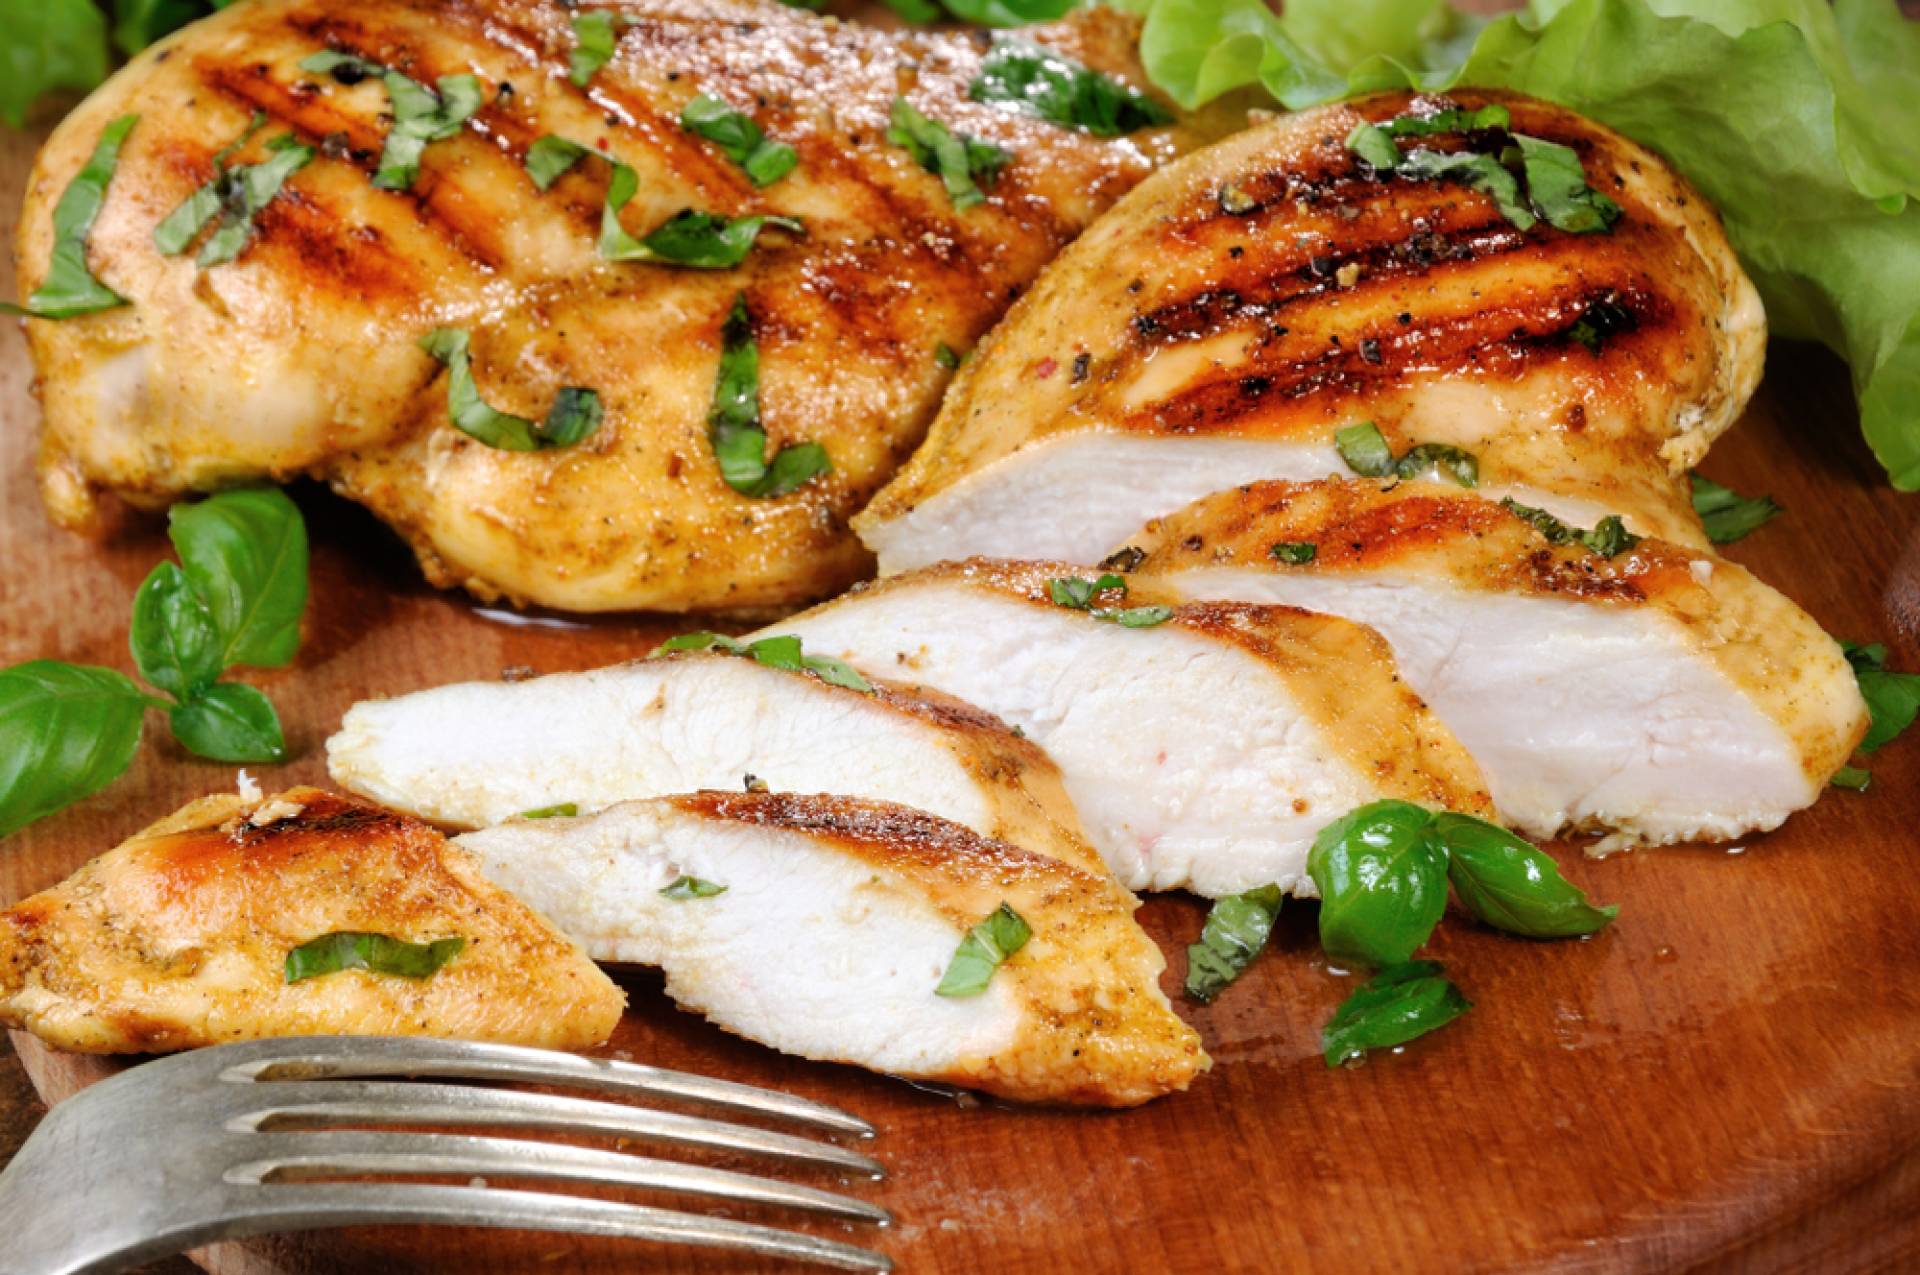 Basil Grilled Chicken with Corn Cakes